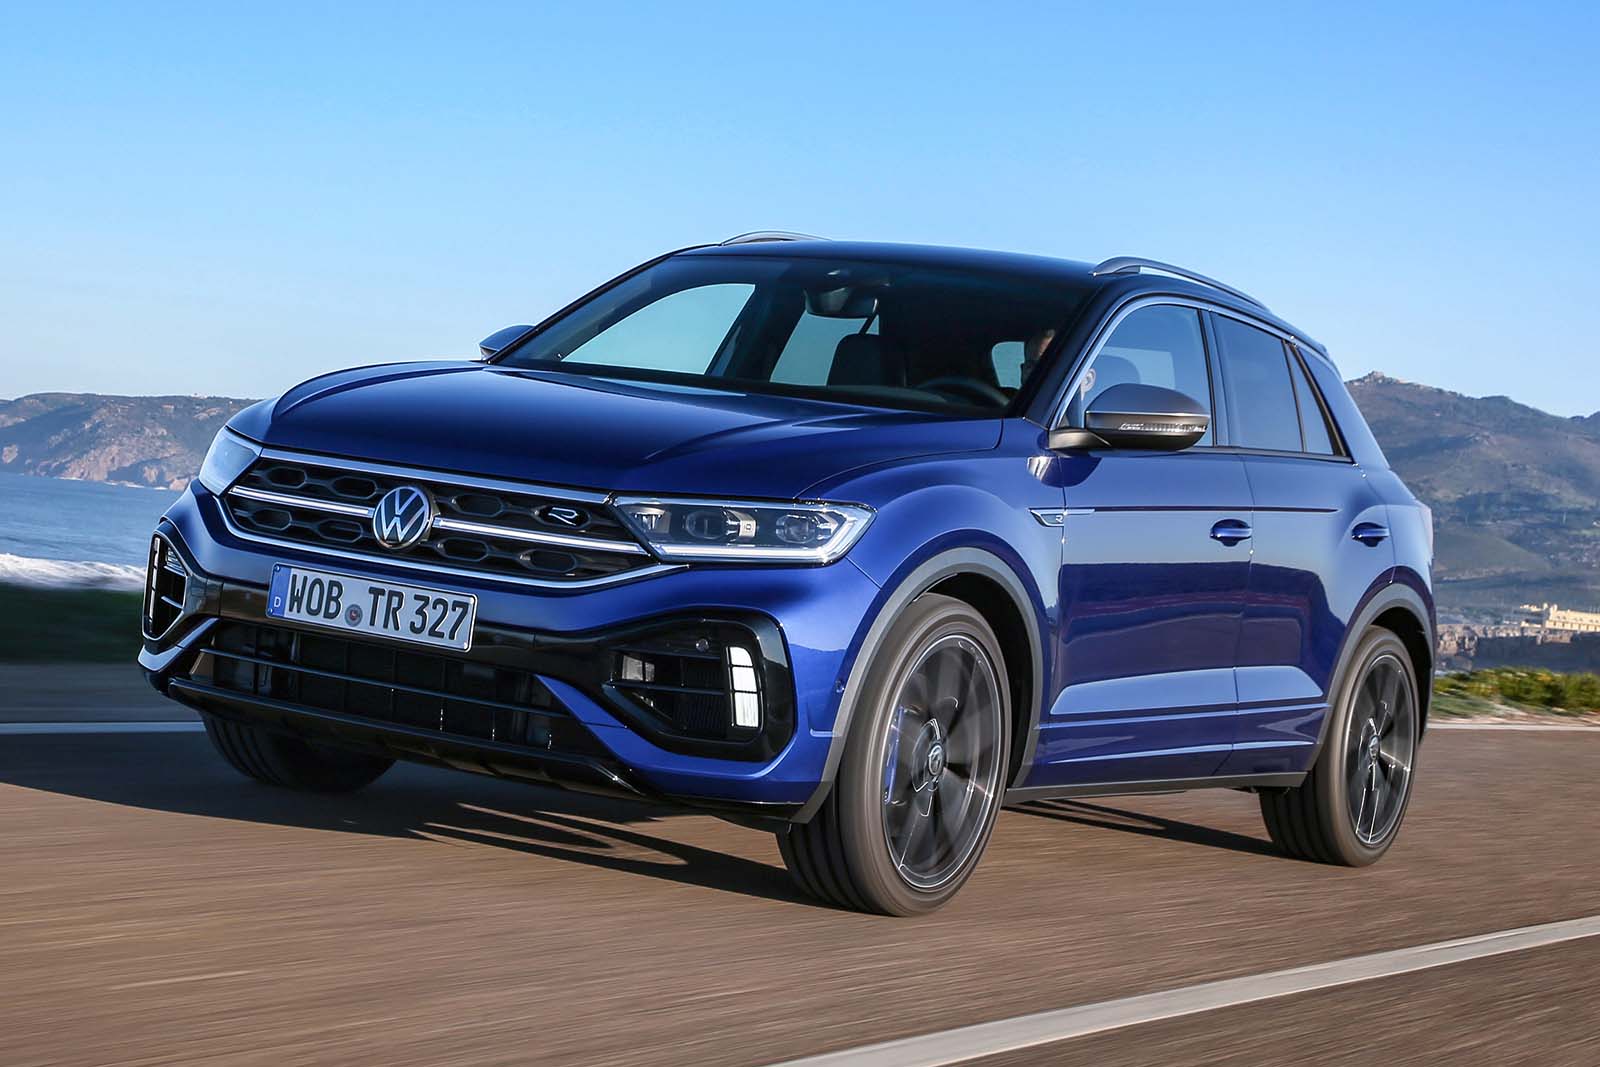 https://www.autocar.co.uk/sites/autocar.co.uk/files/images/car-reviews/first-drives/legacy/volkswagen-t-roc-r-front-three-quarter-tracking.jpg